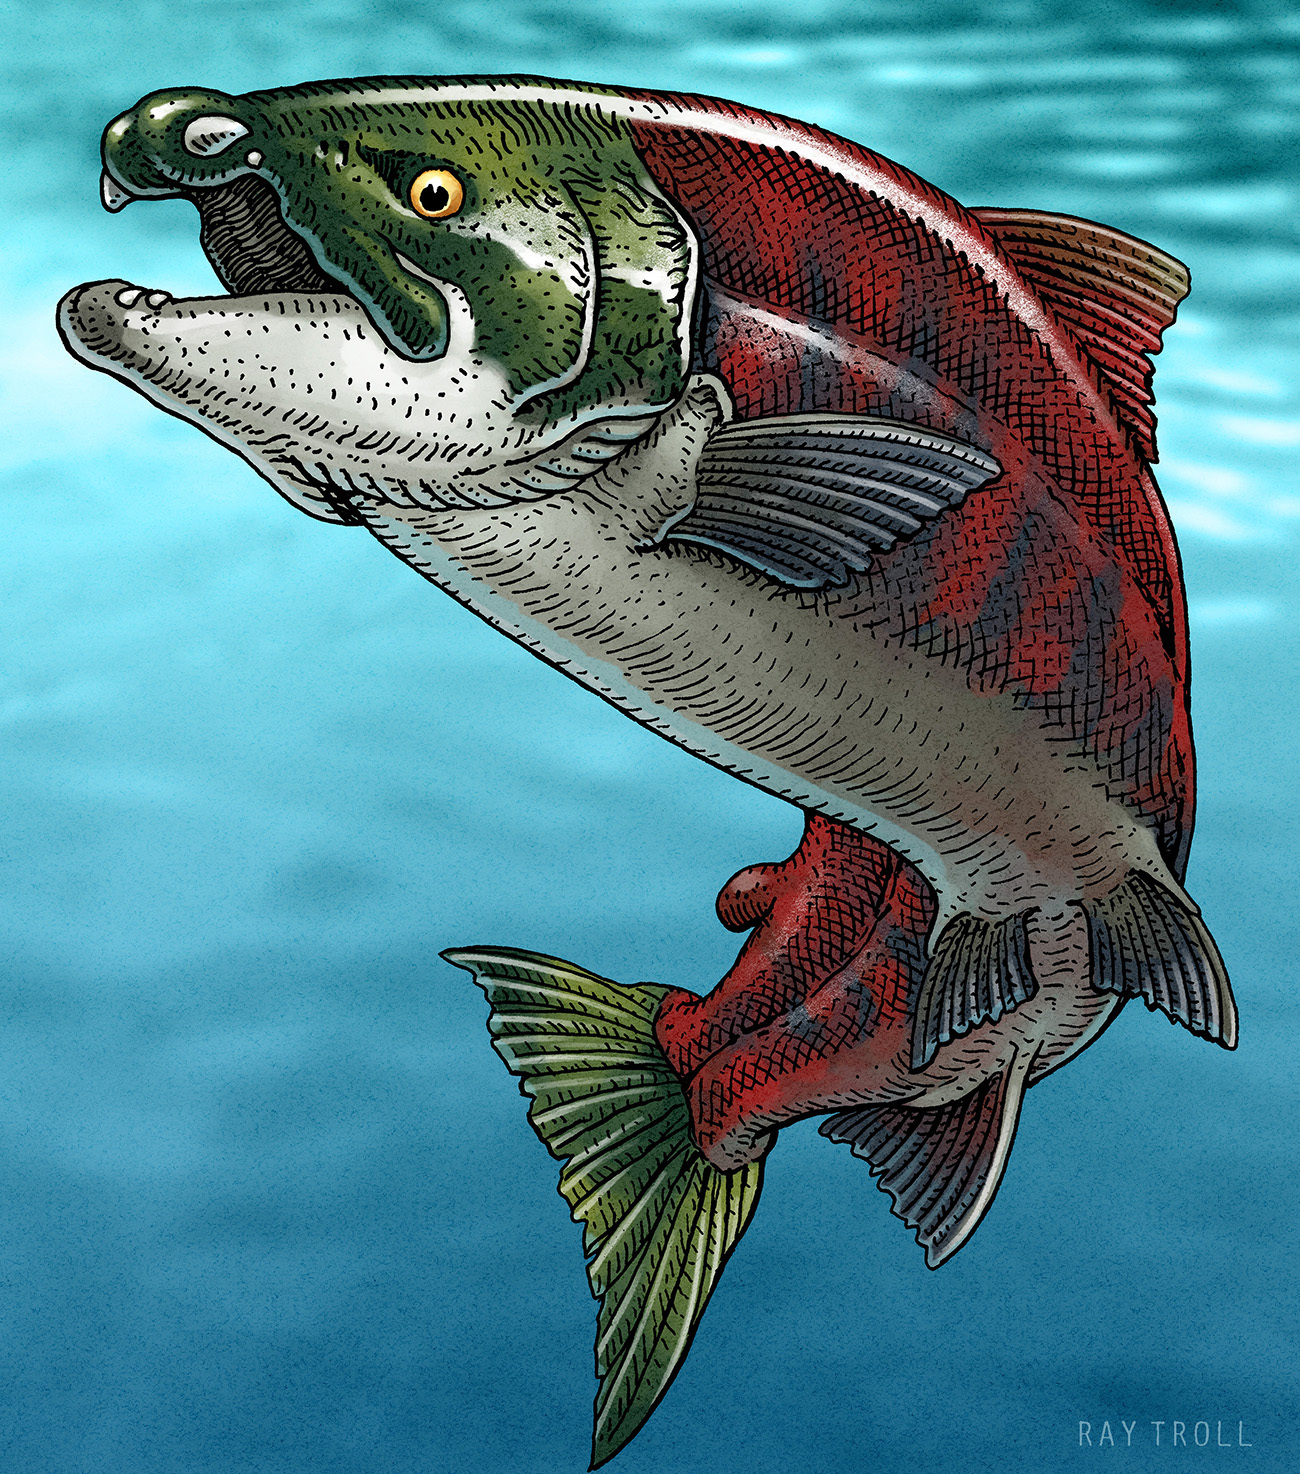 An illustration of a large prehistoric salmon Oncorhynchus rastrosus. It has pink, green and white coloring and tusks on the outside of its mouth. 